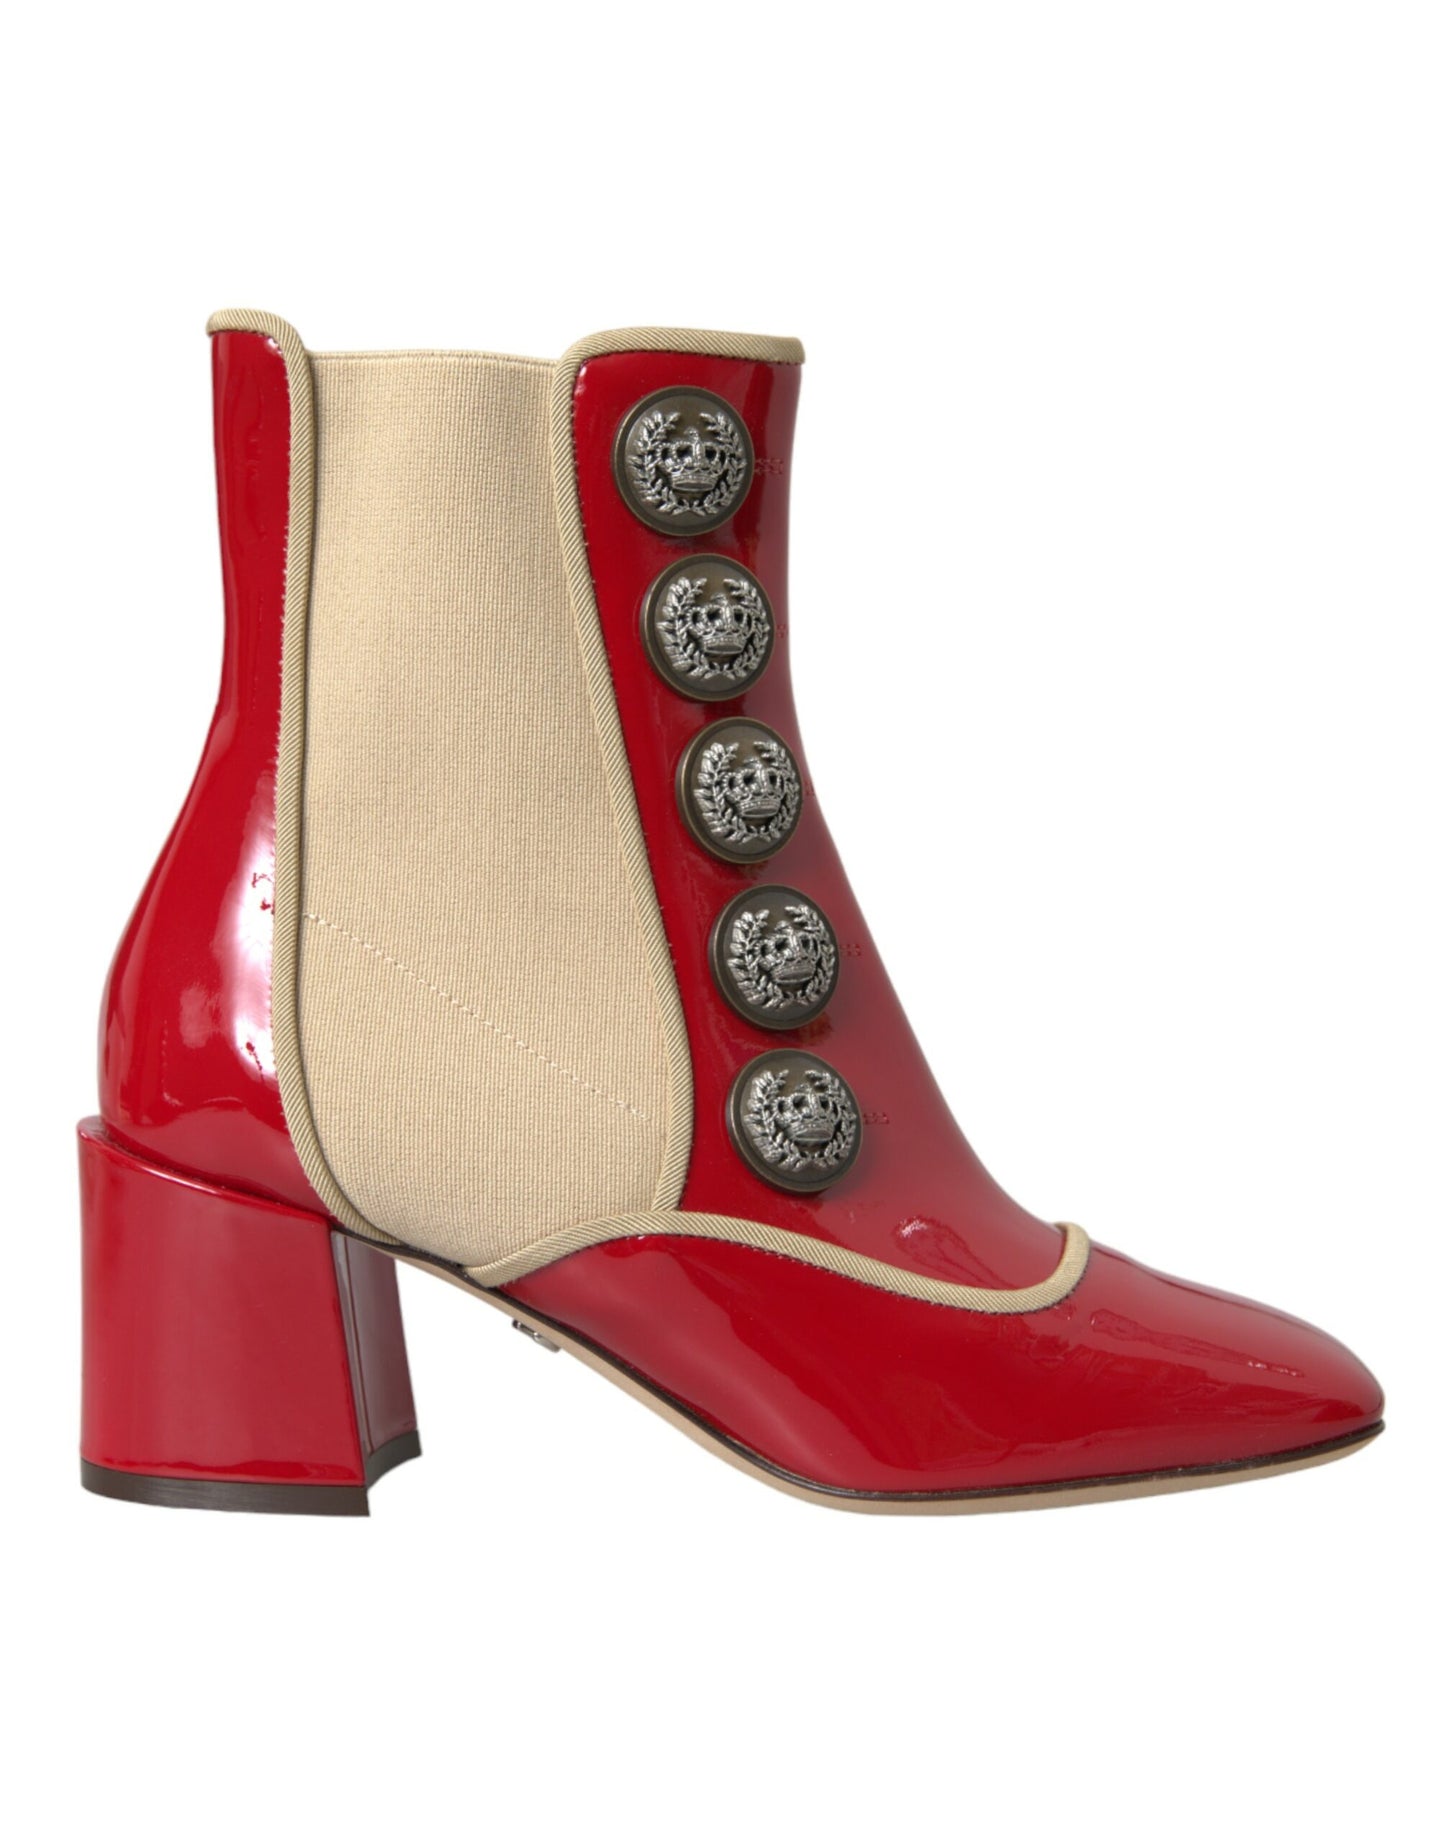 Dolce & Gabbana Red Beige Leather Embellished Mid Calf Boots Shoes